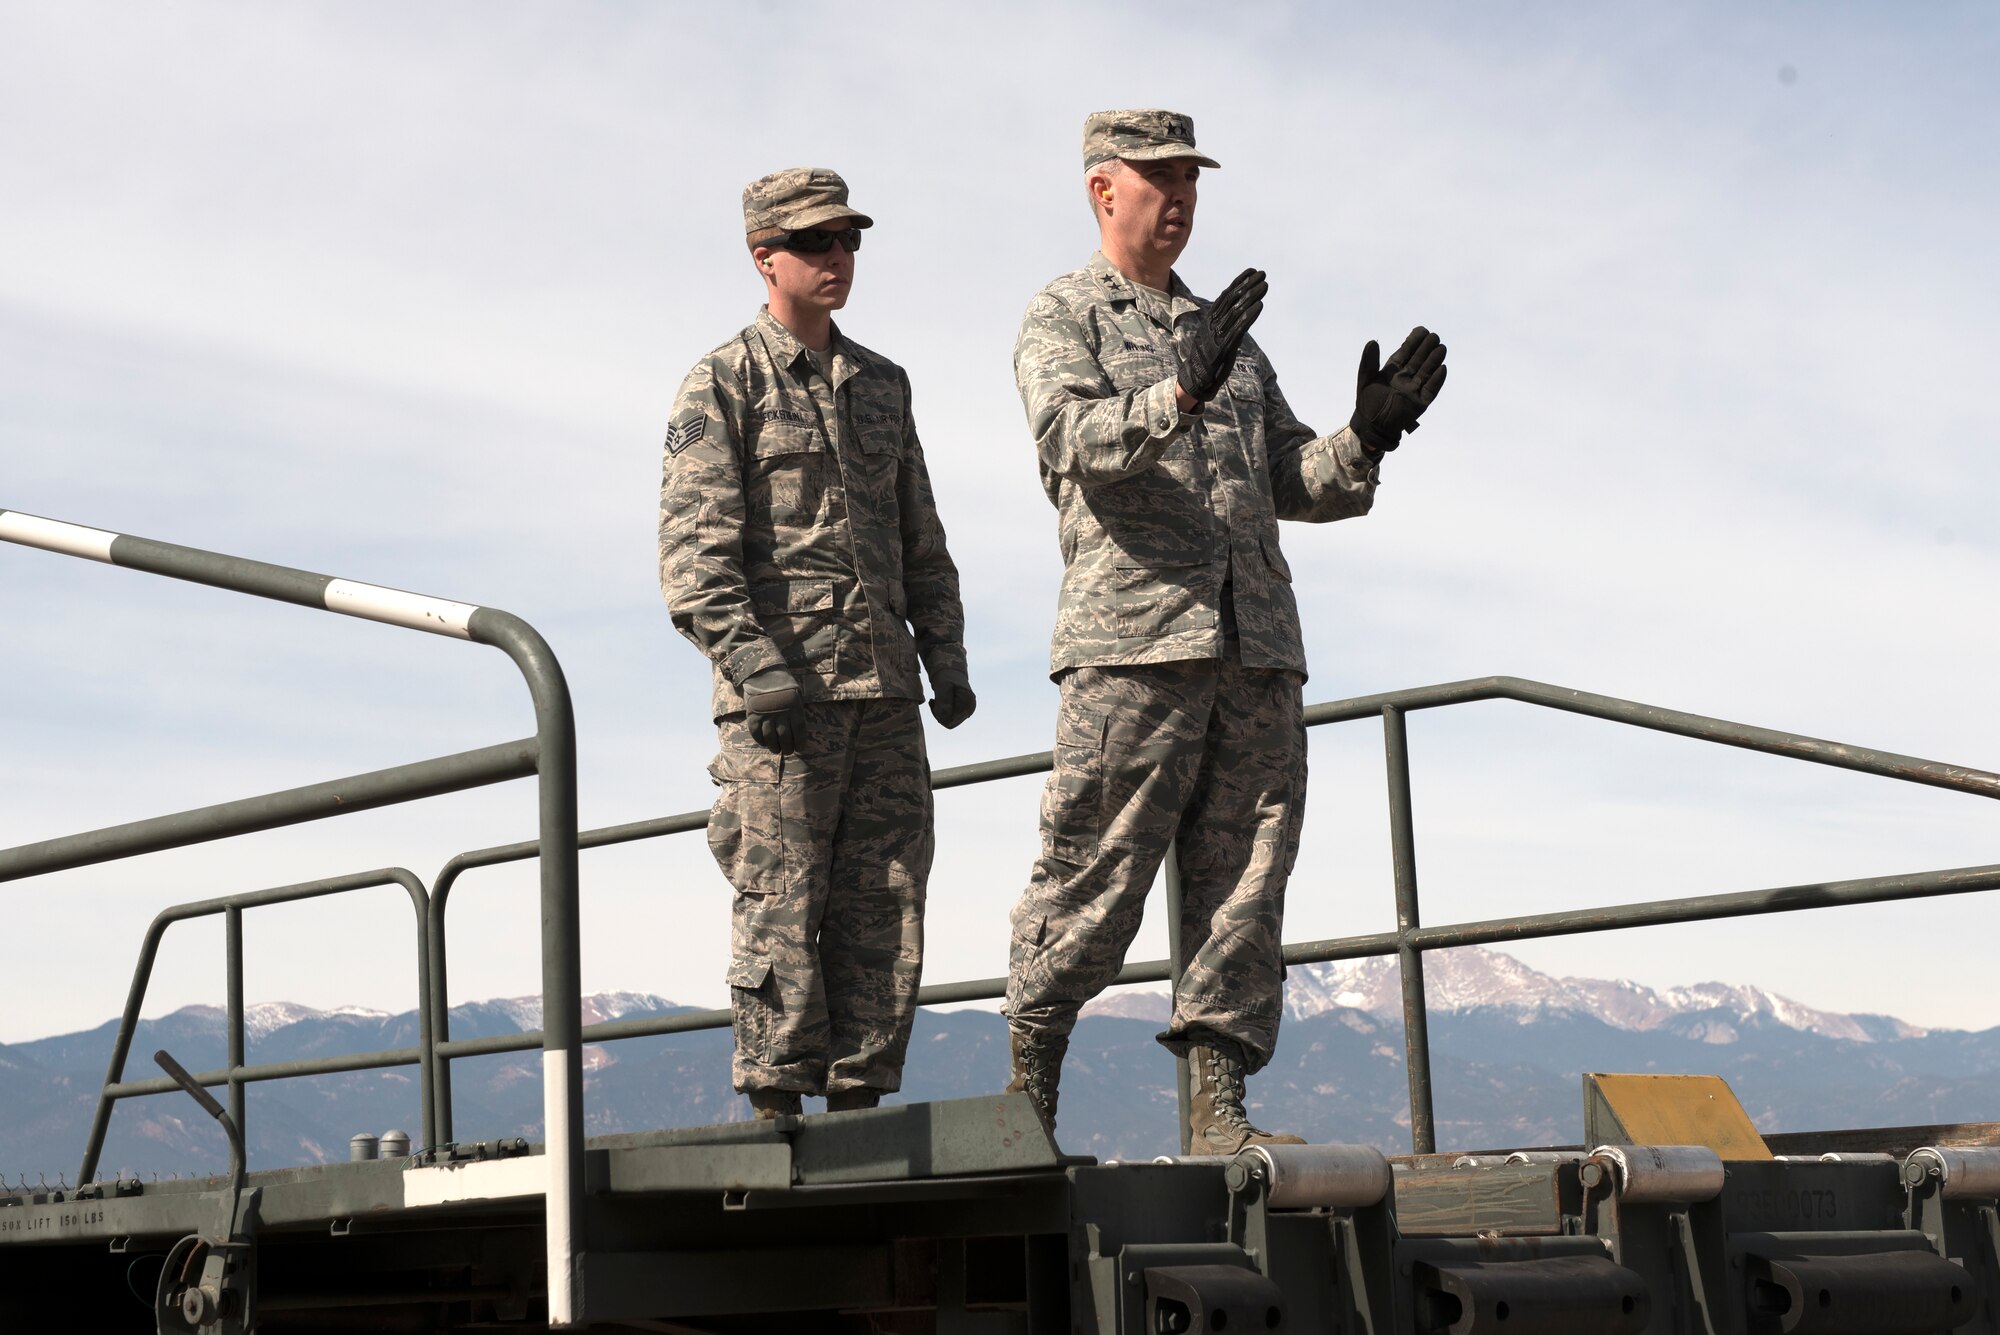 PETERSON AIR FORCE BASE, Colo. – Maj. Gen. Stephen Whiting, 14th Air Force commander, toured the 21st Logistics Readiness Squadron Peterson Air Force Base Colo., March 14, 2018. Whiting participated in securing freight for aircraft loading. (U.S. Air Force photo by Cameron Hunt)